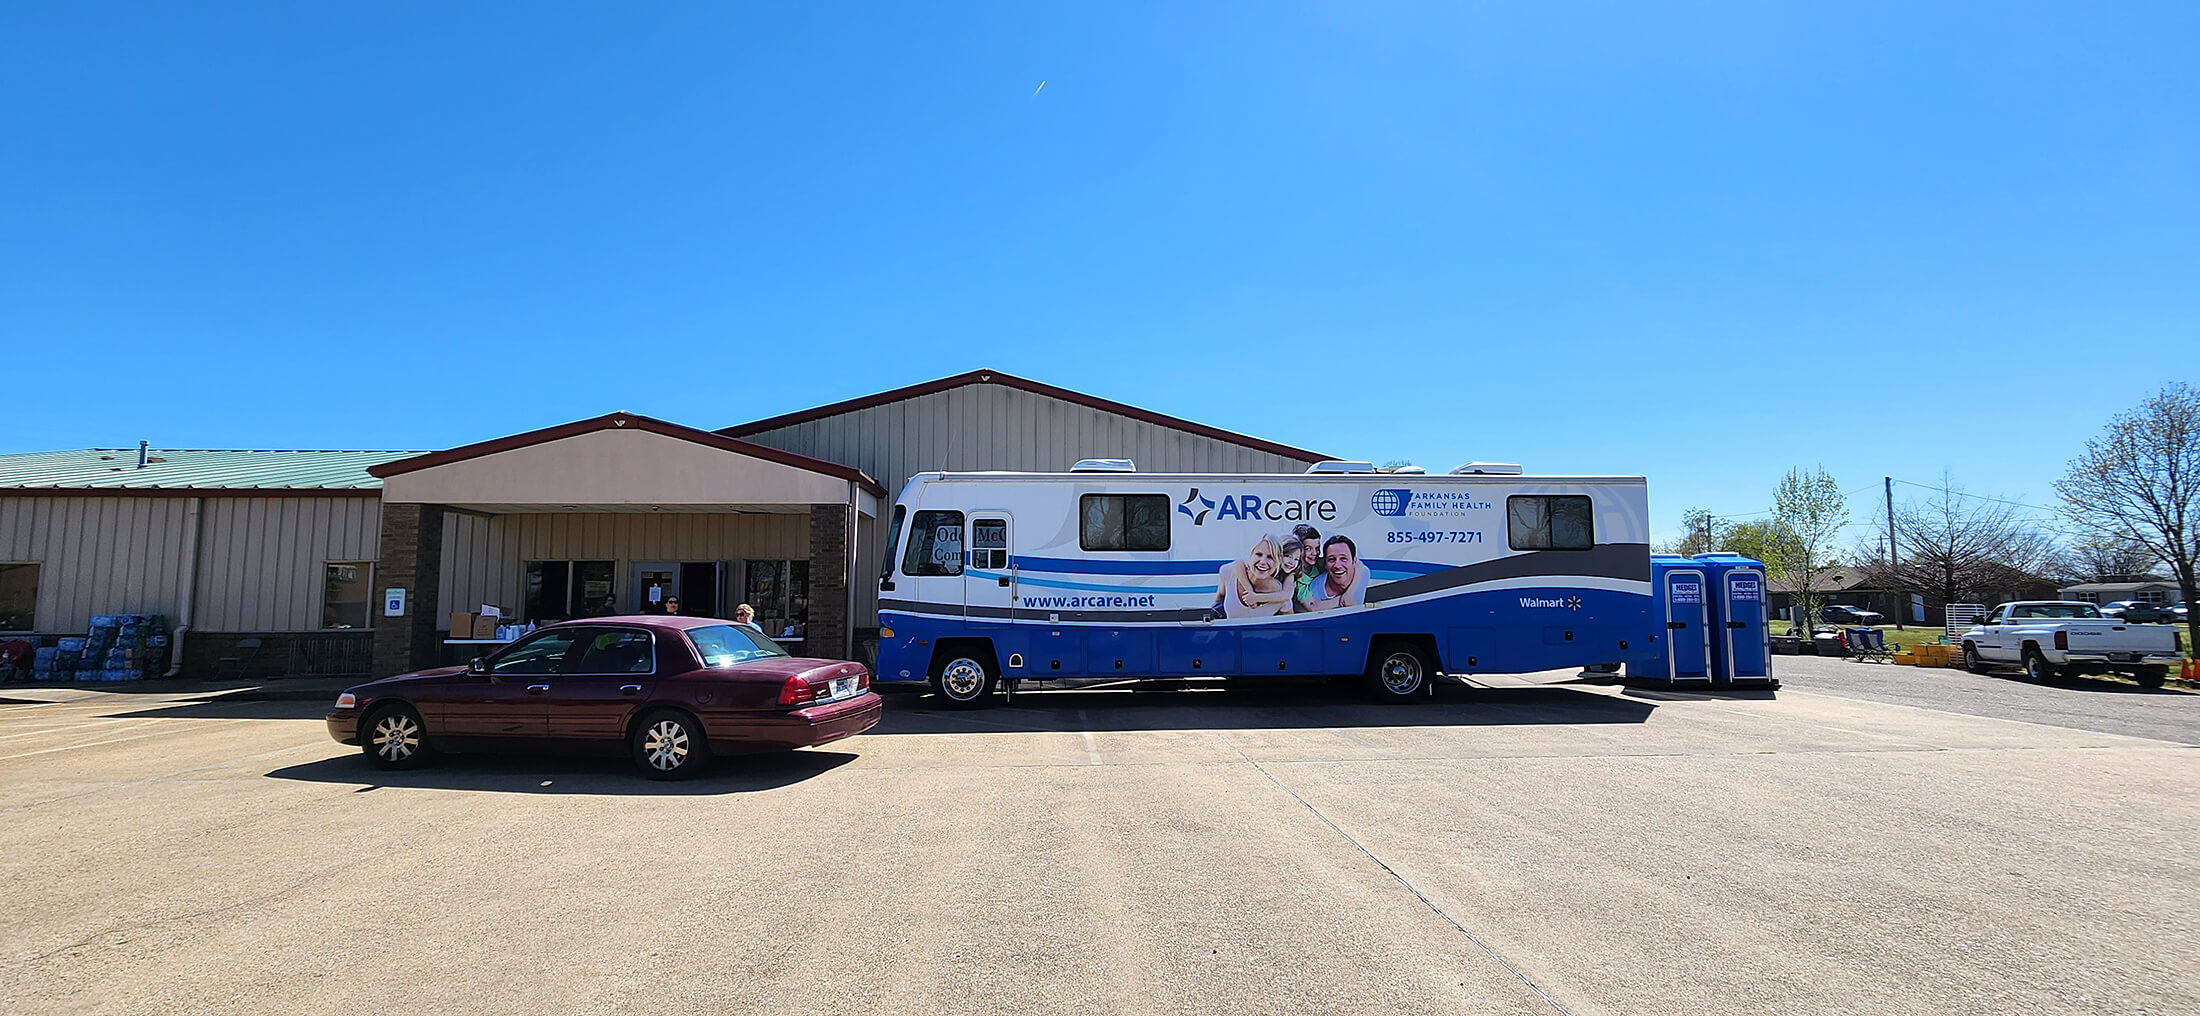 International Medical Corps supported mobile medical units deployed by our partner ARcare in Wynne, Arkansas, following the destructive tornadoes.